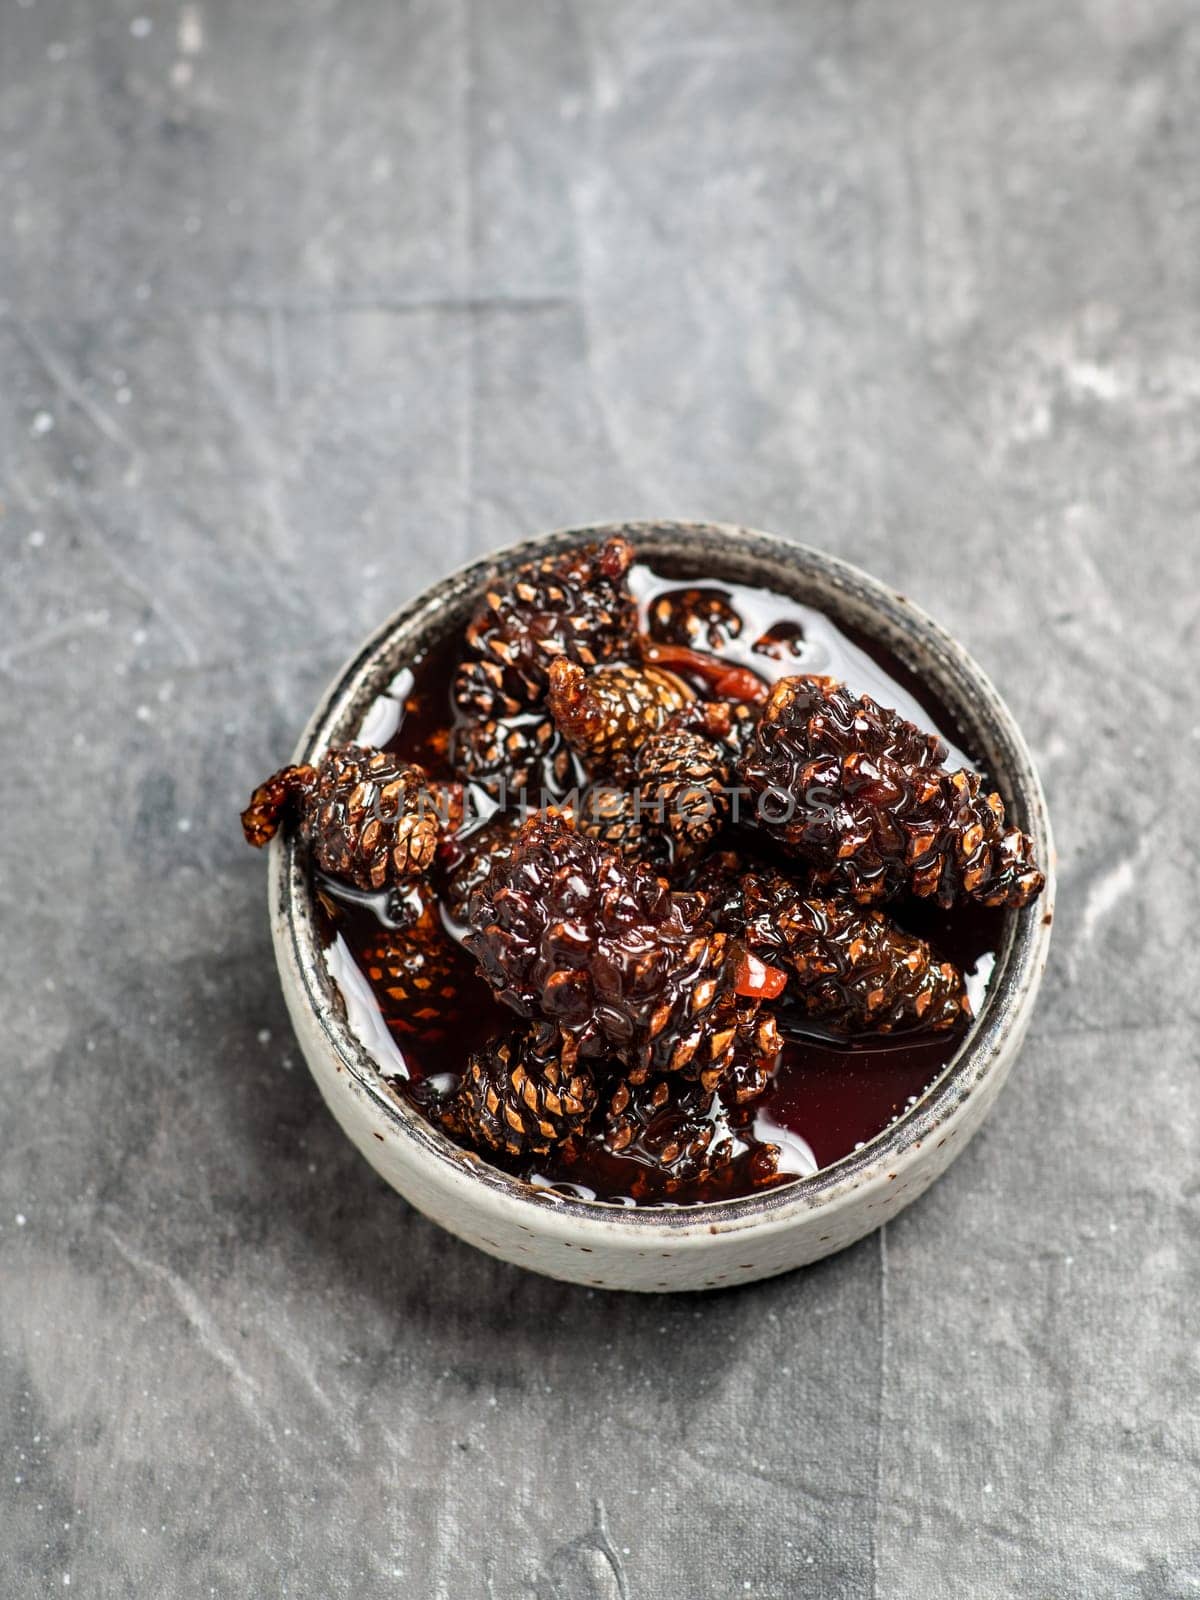 Delicious jam with baby pine cones in small bowl. Traditional Siberian dessert - young pine cones jam on gray textured background. Top view or flat lay.